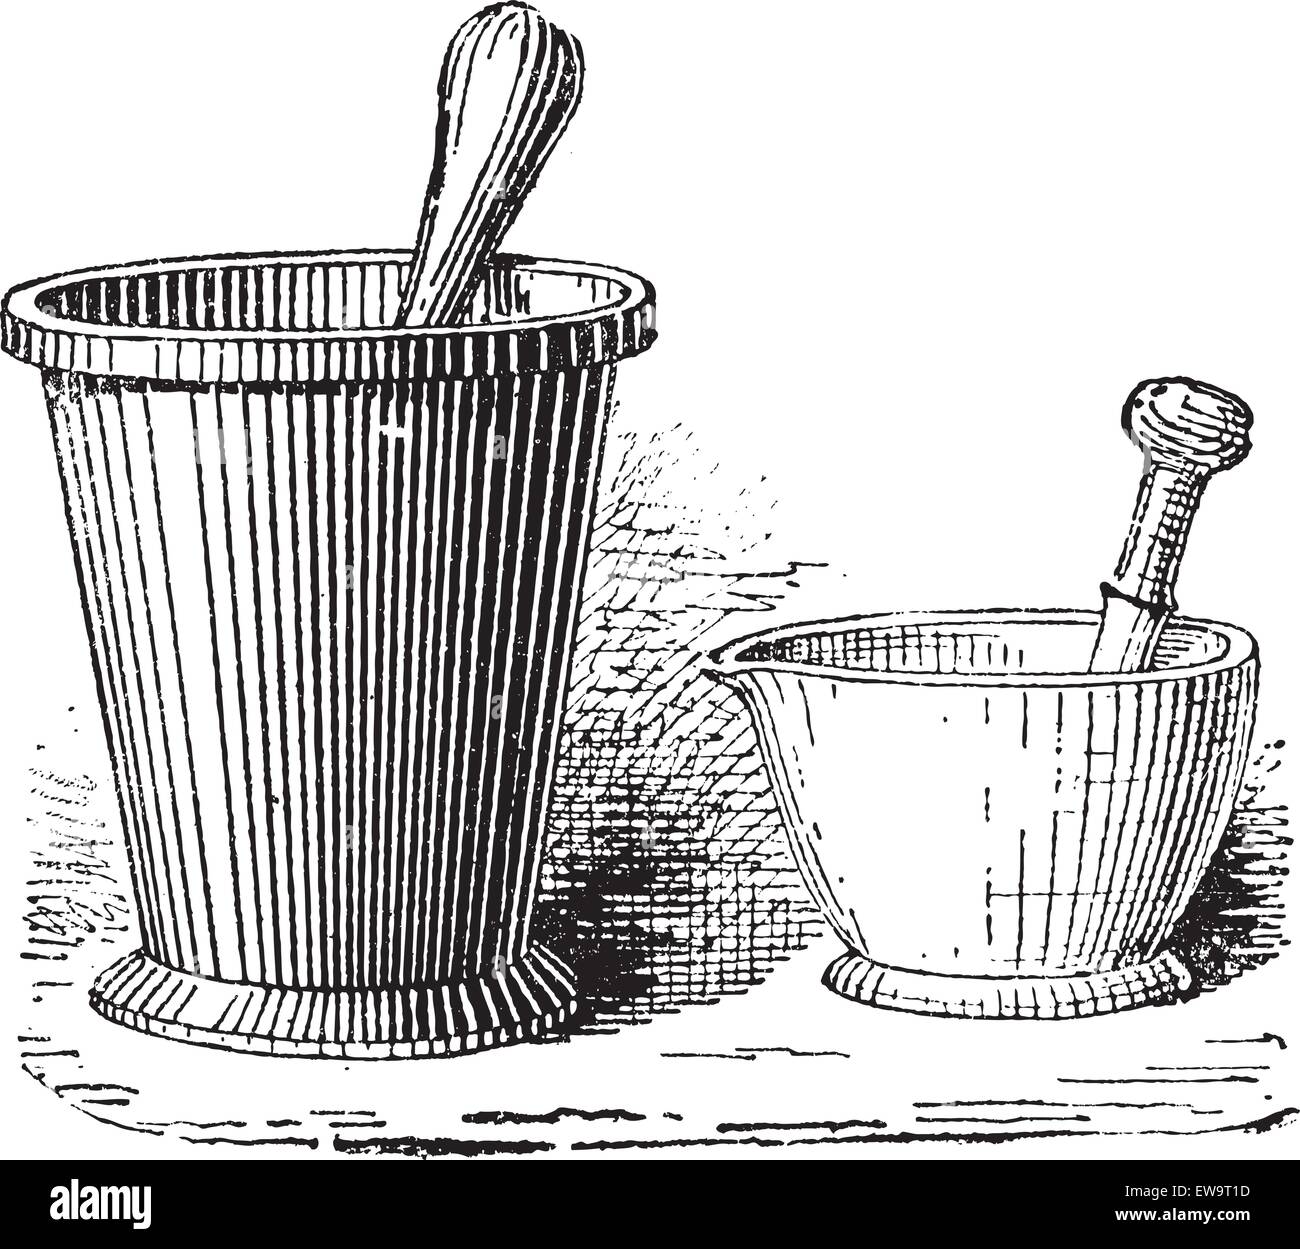 Mortar and Pestle, shown in two sizes, vintage engraved illustration. Dictionary of Words and Things - Larive and Fleury - 1895 Stock Vector